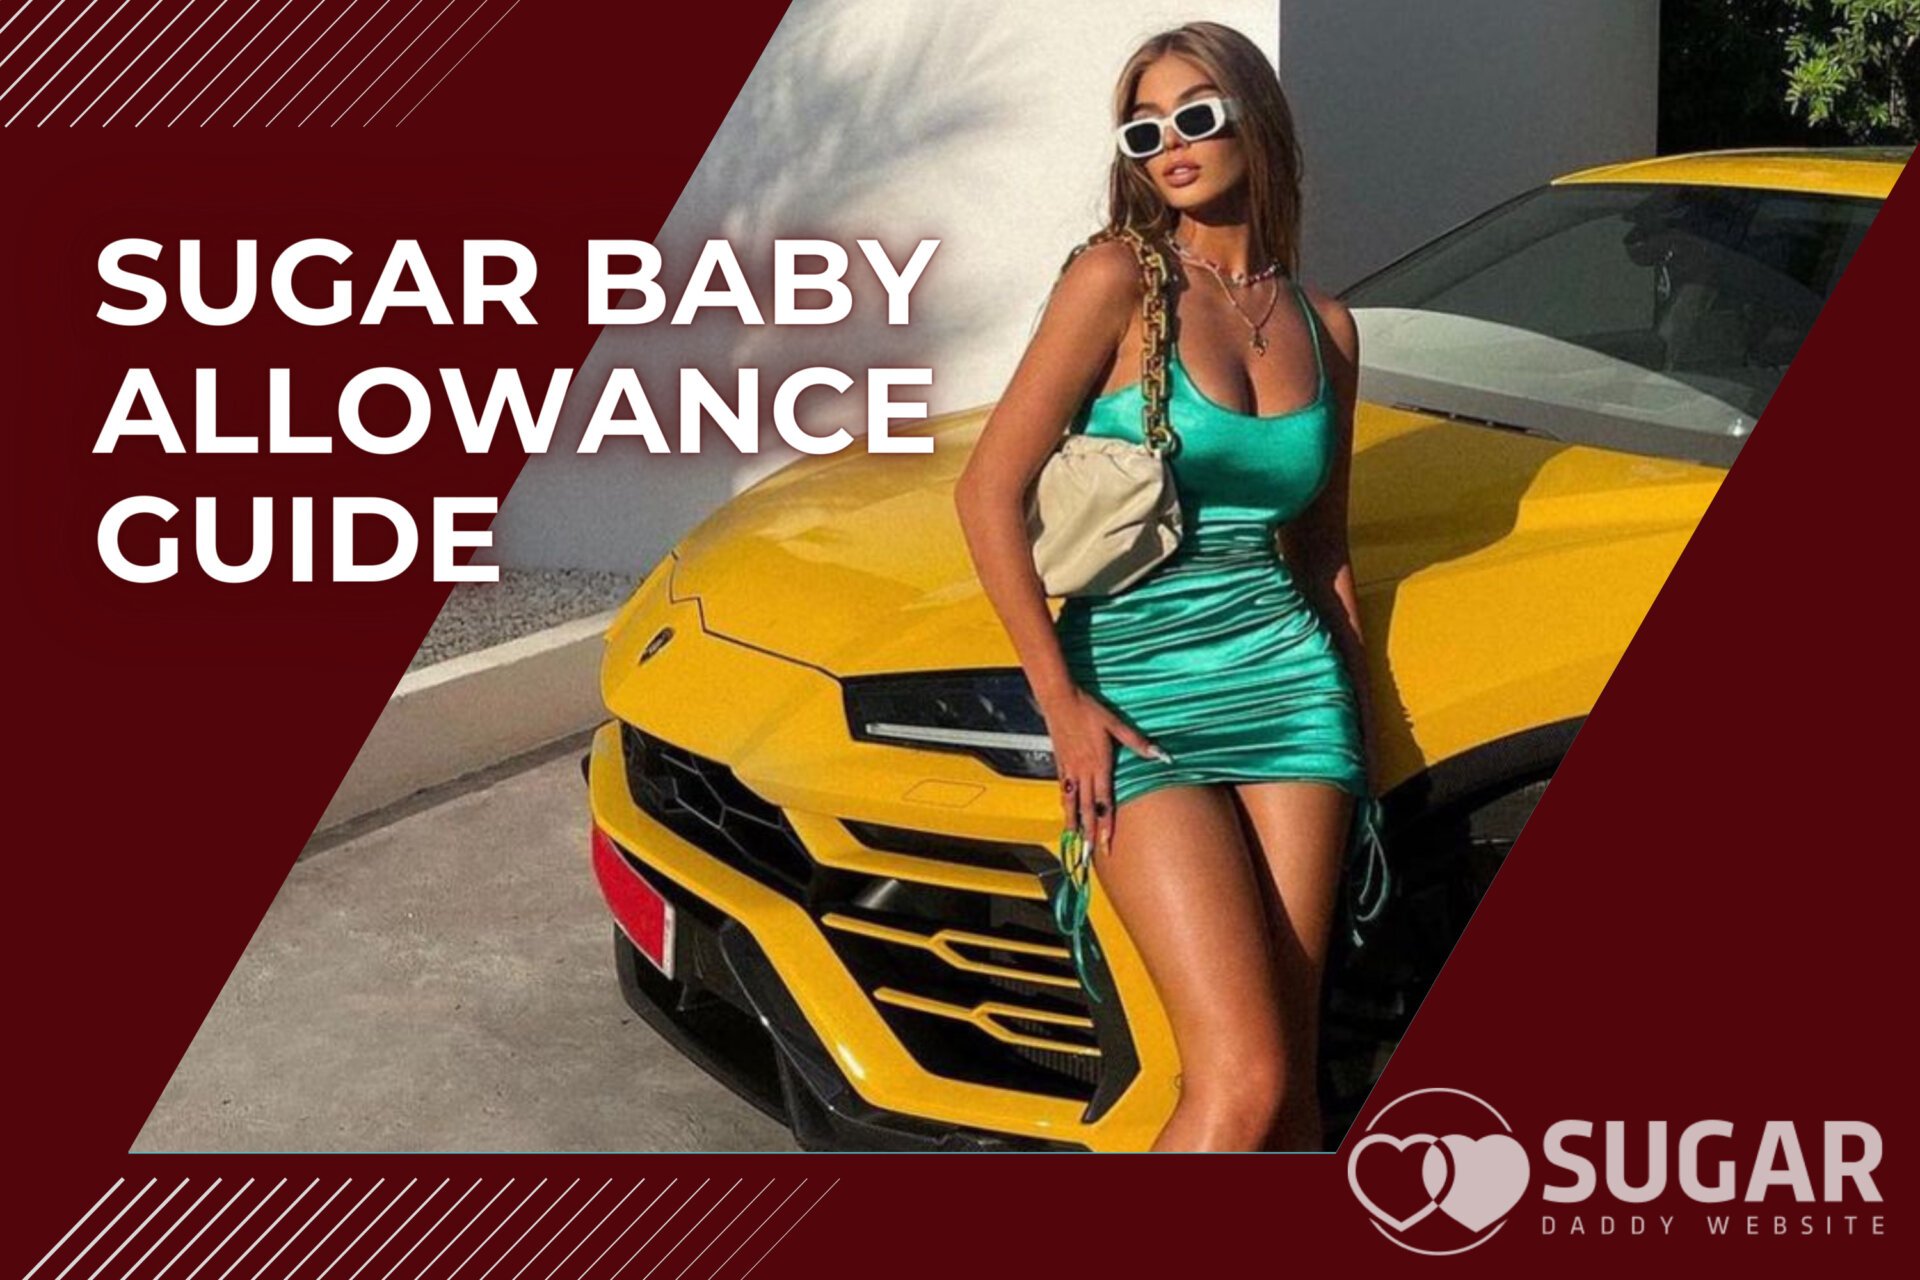 Sugar Baby Allowance Guide: How Much to Pay Sugar Baby?